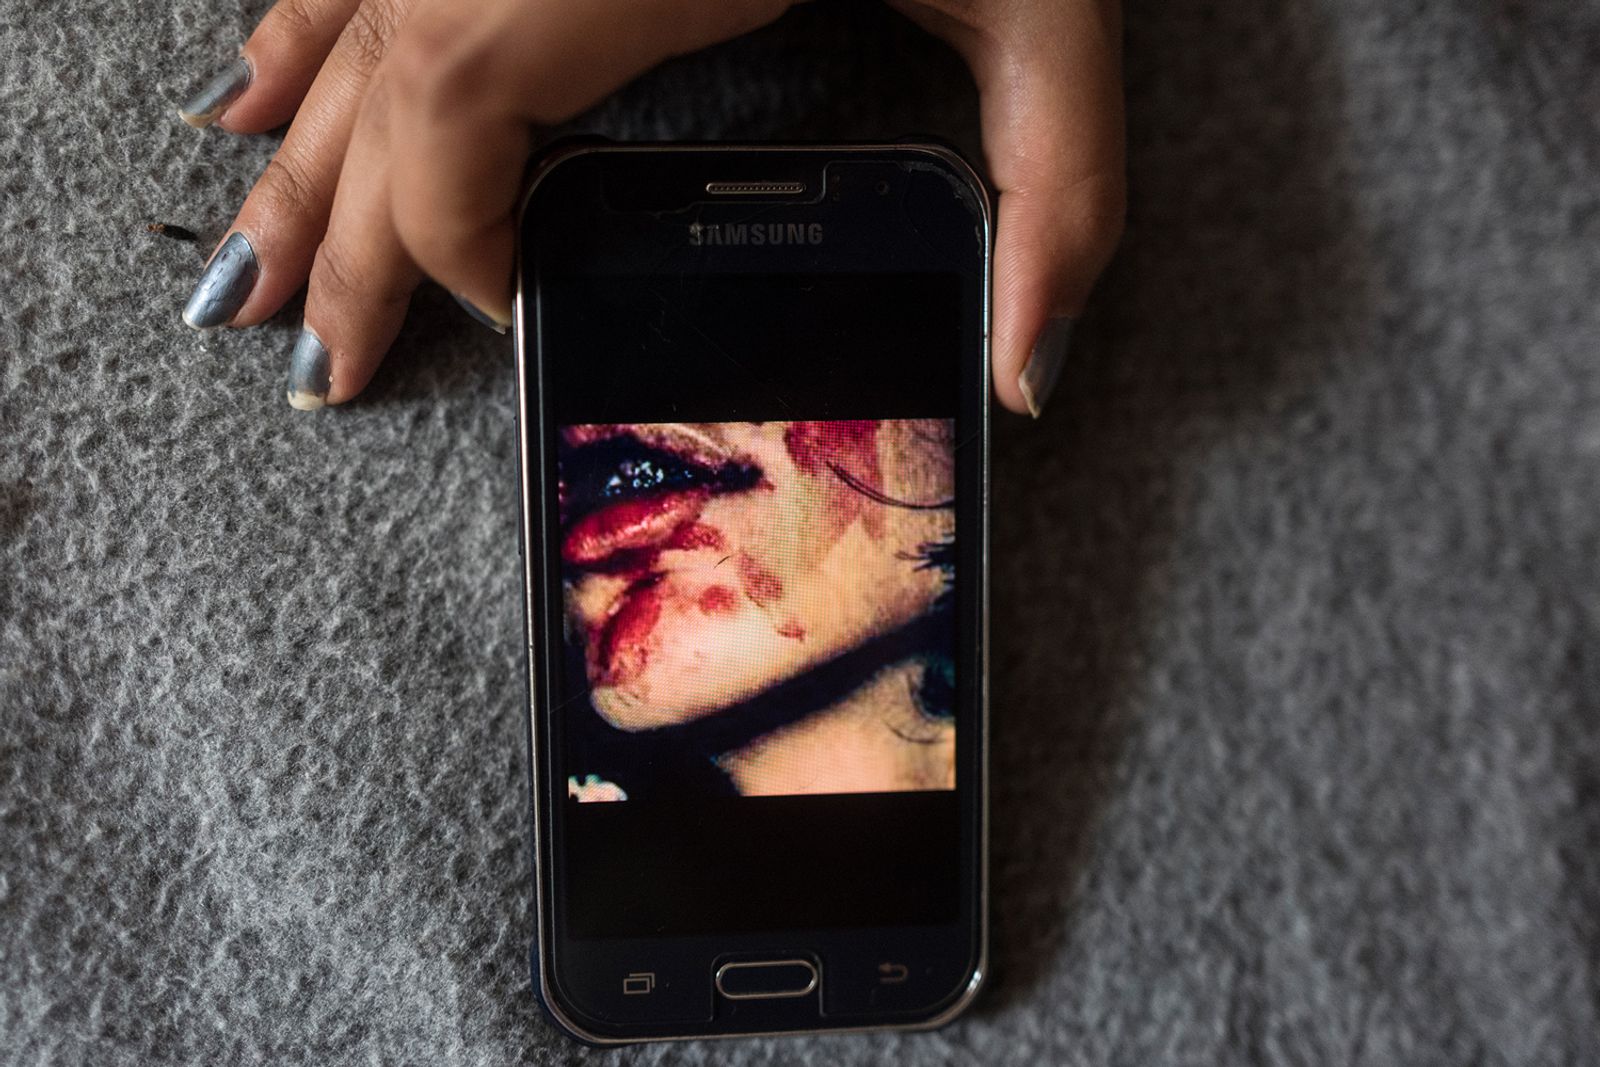 © Tanya Habjouqa - Documentation of the abuse by her ex husband, she fled before he killed her through bathroom window.